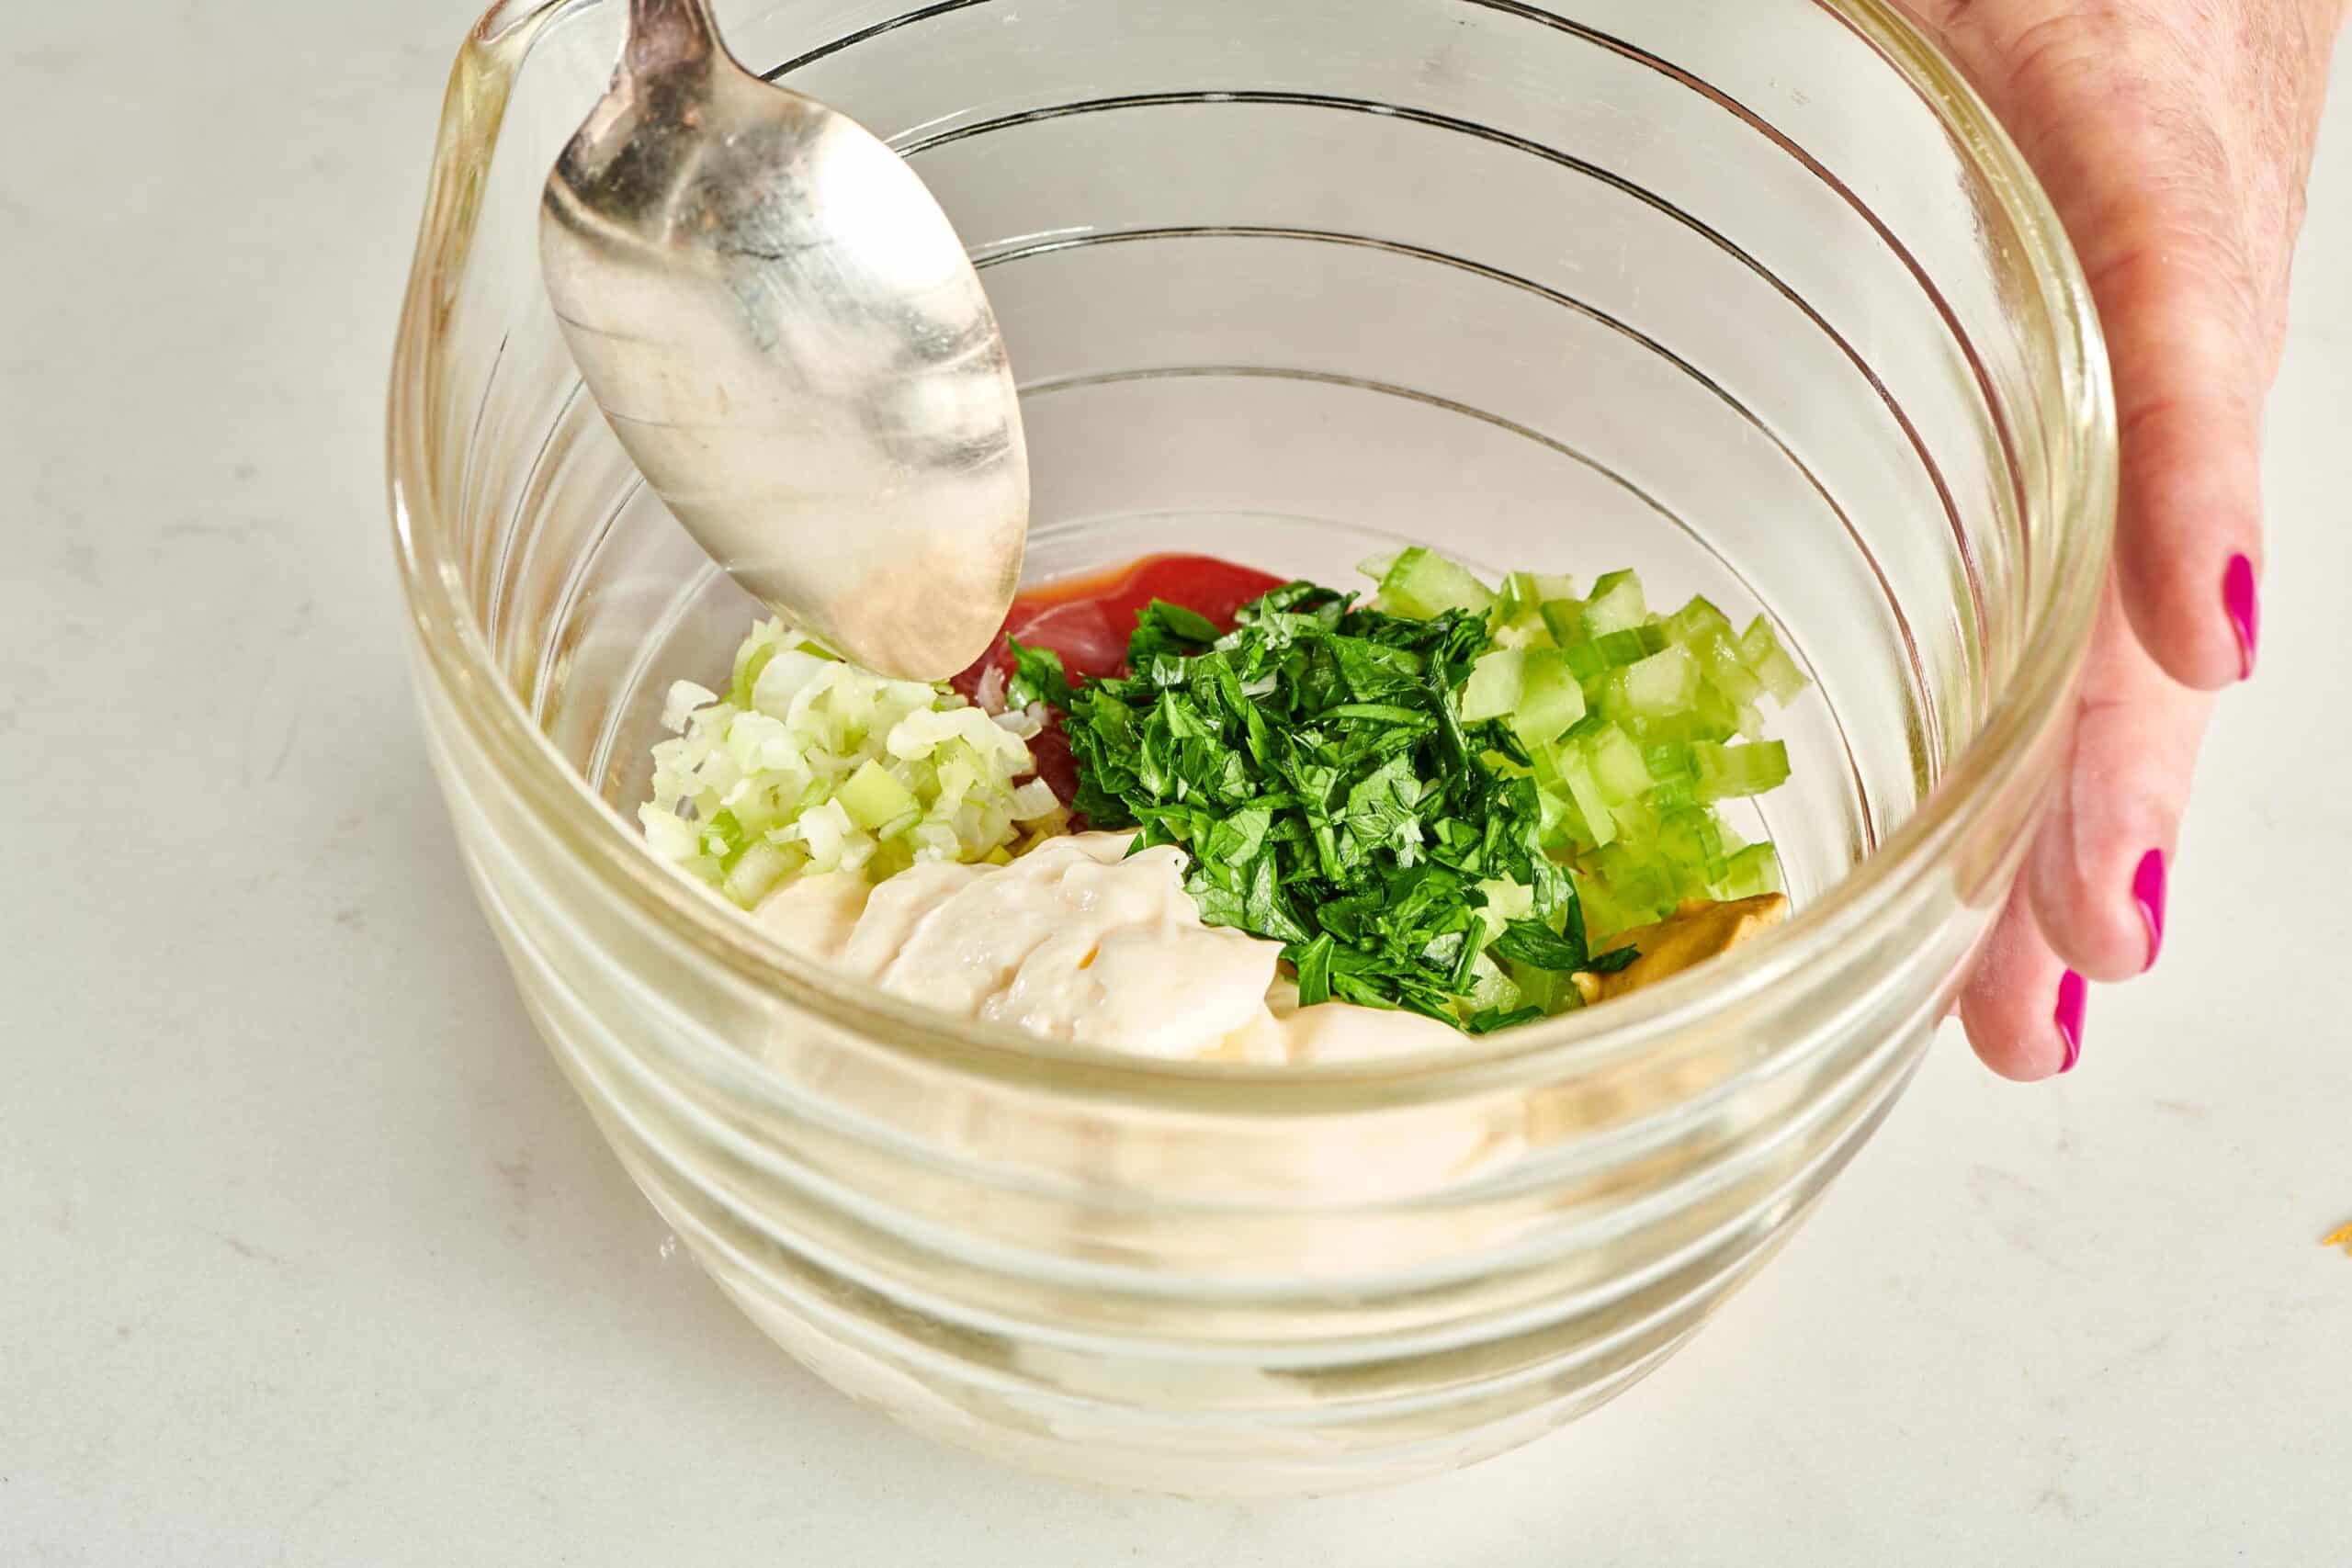 Remoulade Sauce ingredients in a glass bowl.